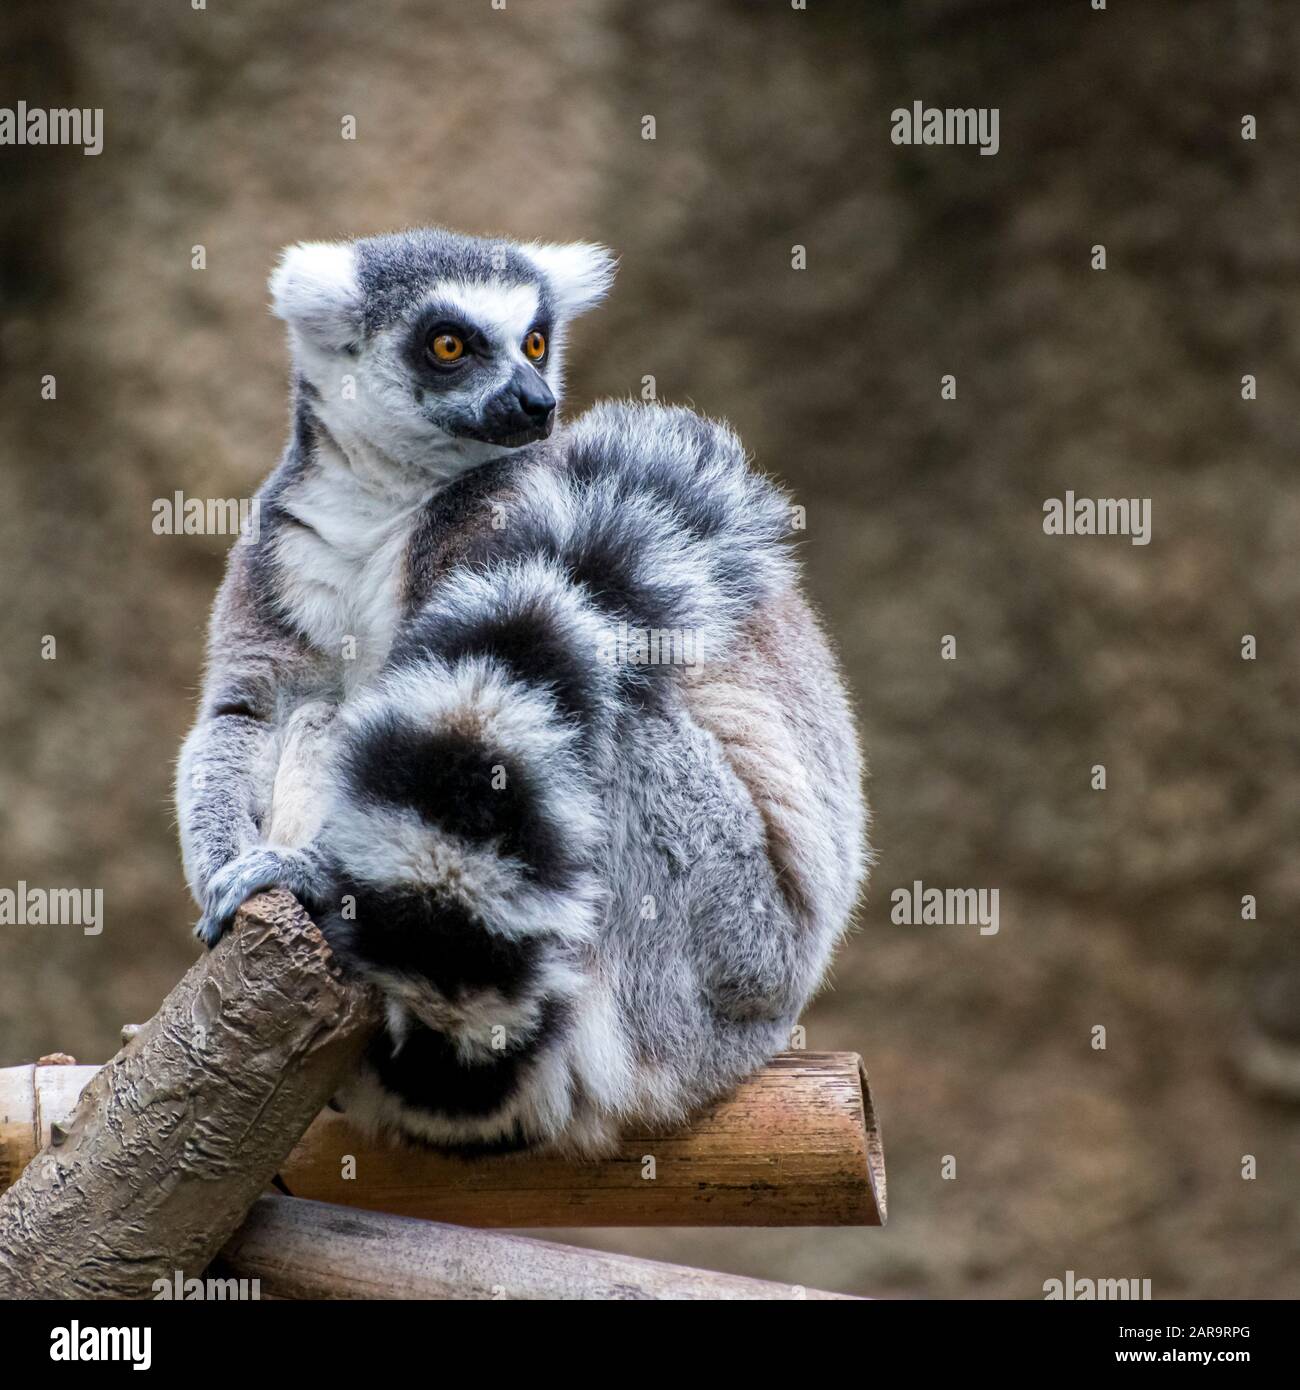 Portrait of a Ring-Tailed Lemur with its Tail Wrapped around Itself Stock Photo